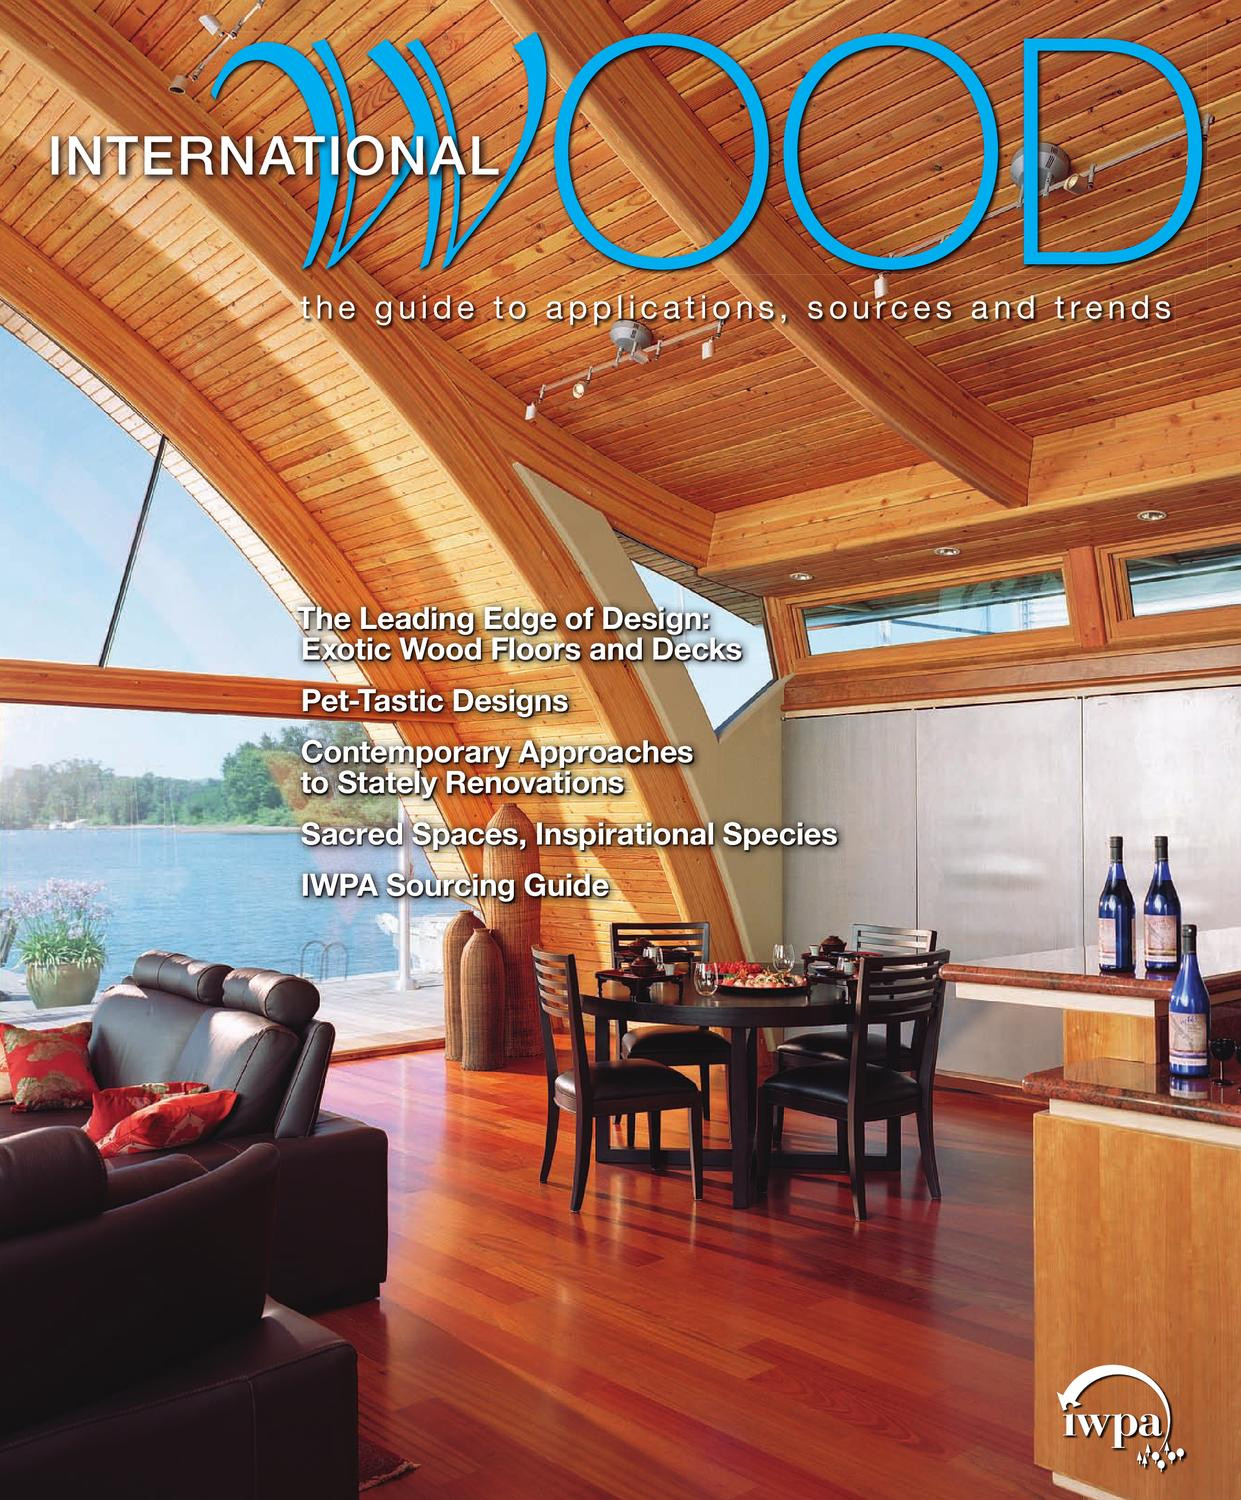 expert hardwood flooring ontario of international wood magazine 09 by bedford falls communications issuu intended for page 1